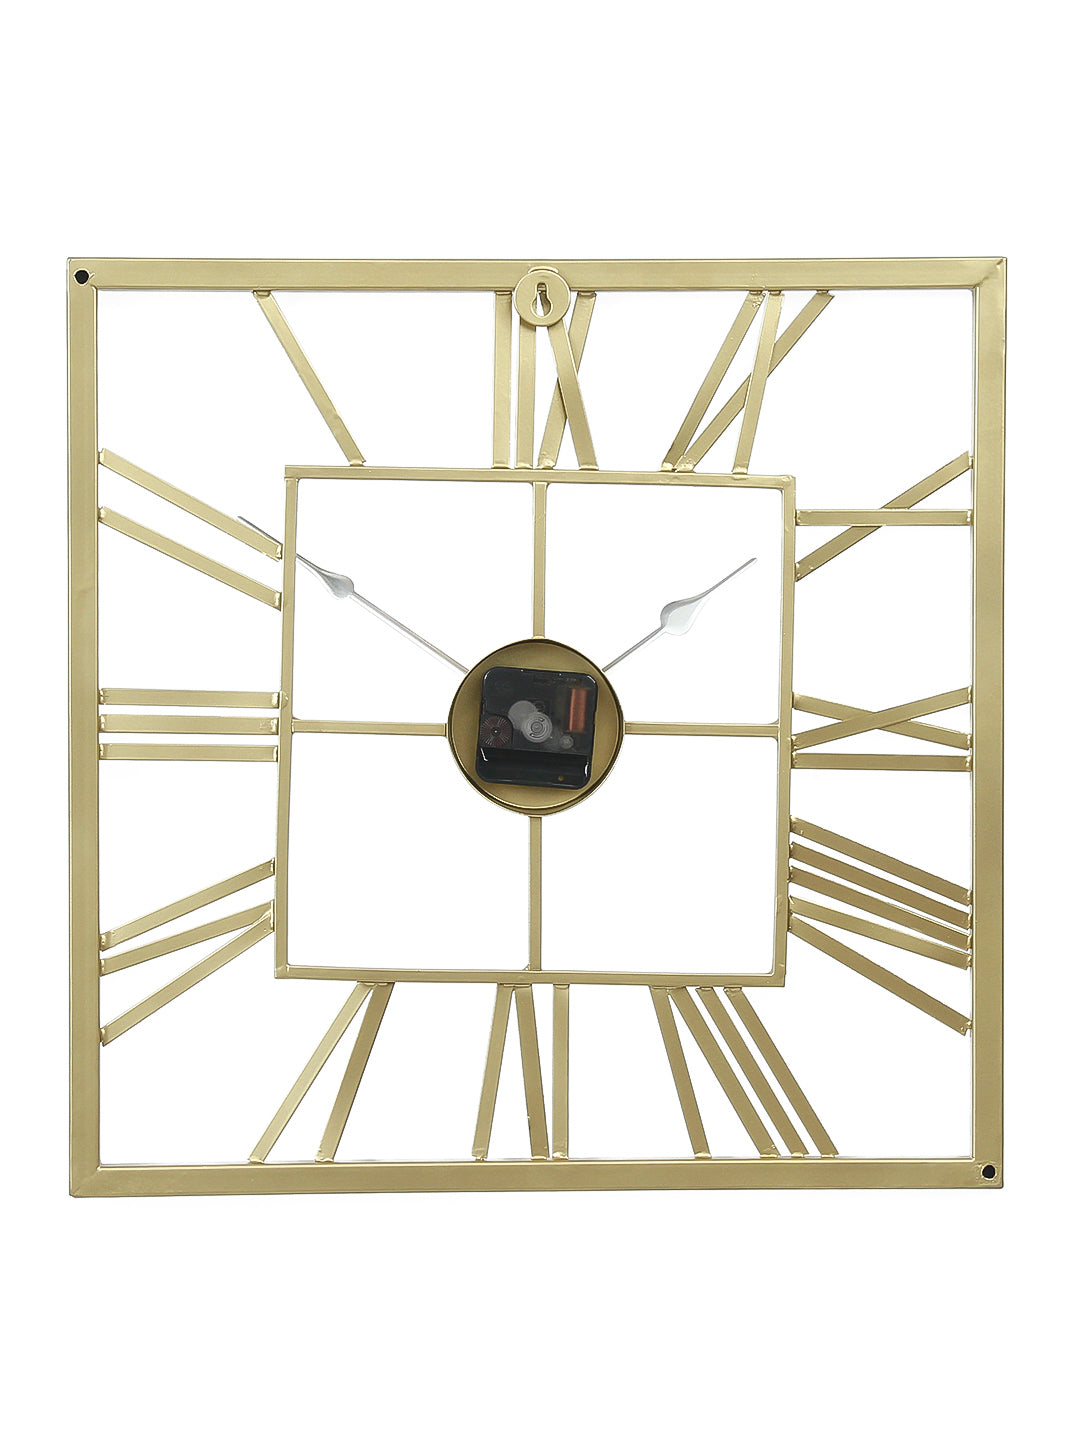 Golden Iron Roman Figure Square Hand-Crafted Analog Wall Clock Without Glass ( 45Cm x 45Cm ) 6